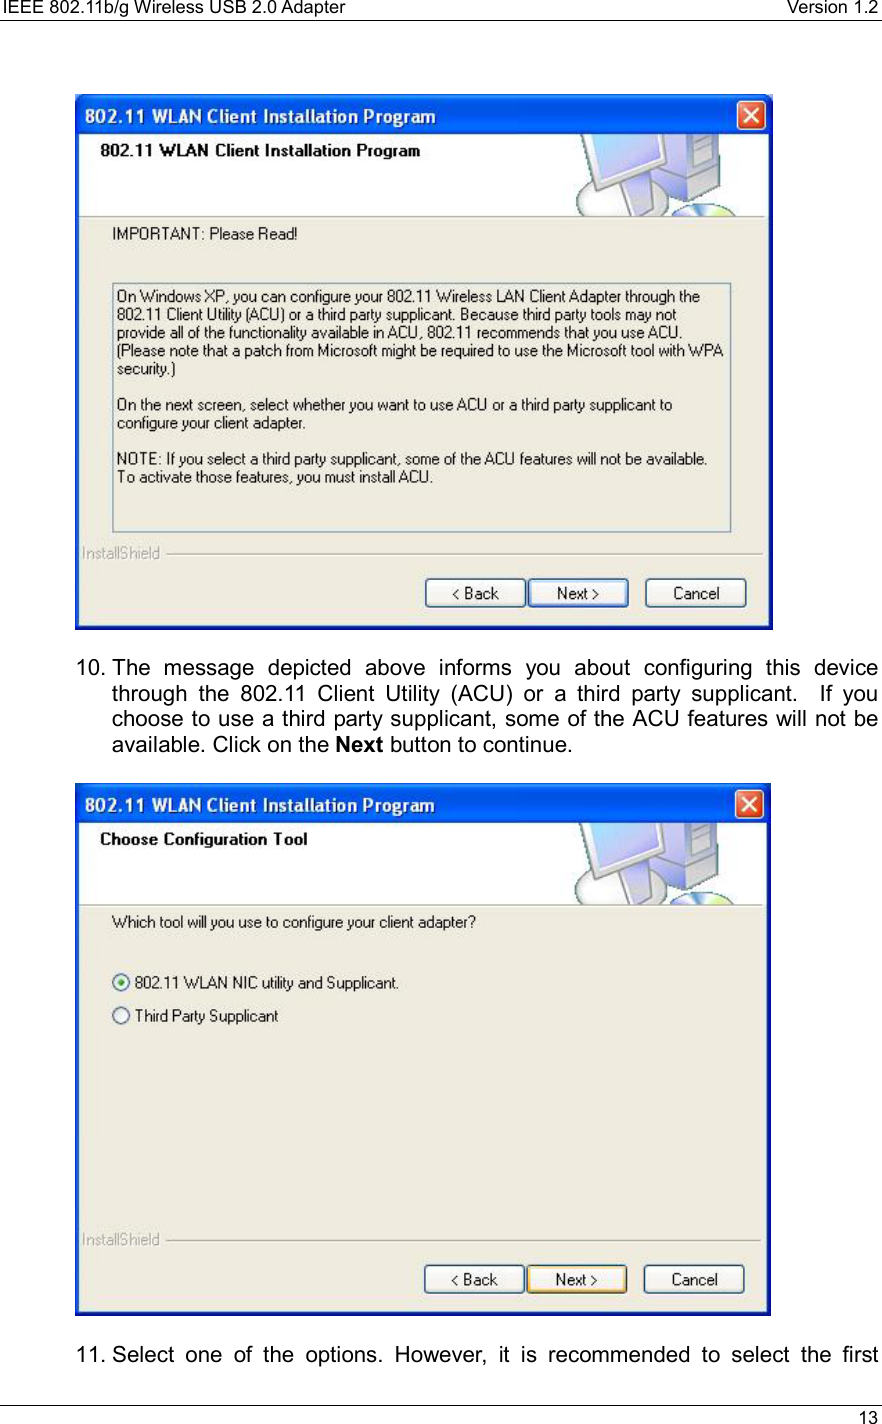 IEEE 802.11b/g Wireless USB 2.0 Adapter    Version 1.2   13      10. The message depicted above informs you about configuring this device through the 802.11 Client Utility (ACU) or a third party supplicant.  If you choose to use a third party supplicant, some of the ACU features will not be available. Click on the Next button to continue.      11. Select one of the options. However, it is recommended to select the first 